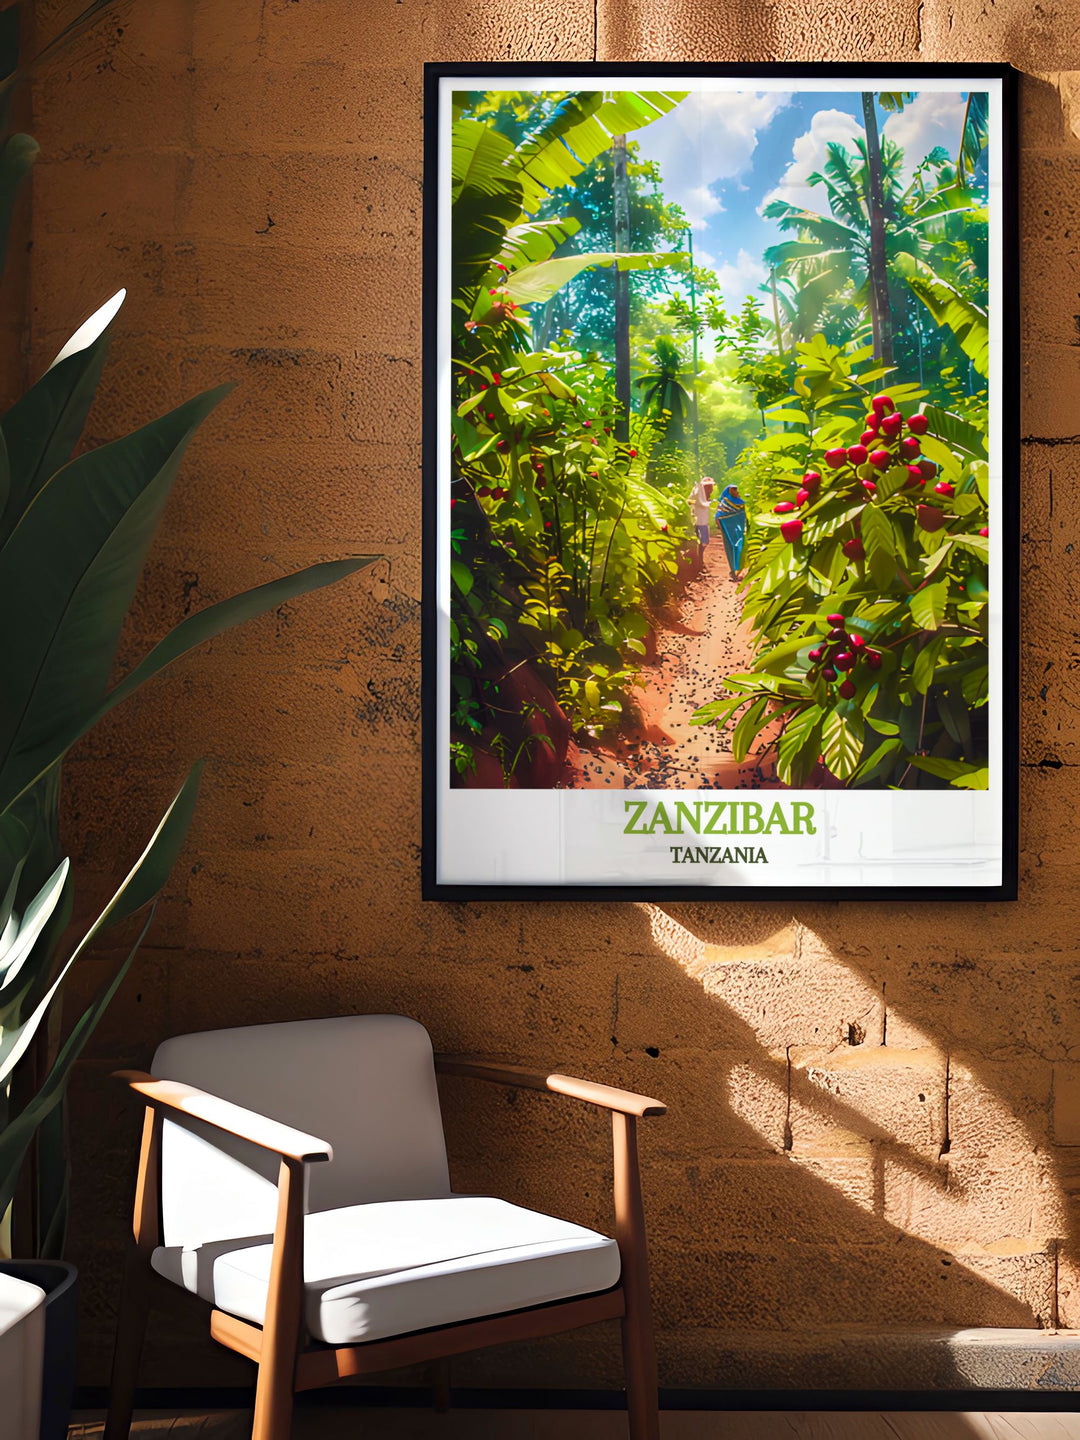 Beautiful Spice Farms wall art showcasing the exotic spices and lush greenery of Zanzibar perfect for adding a vibrant and natural touch to your home decor with high quality prints that celebrate the agricultural heritage of the island.